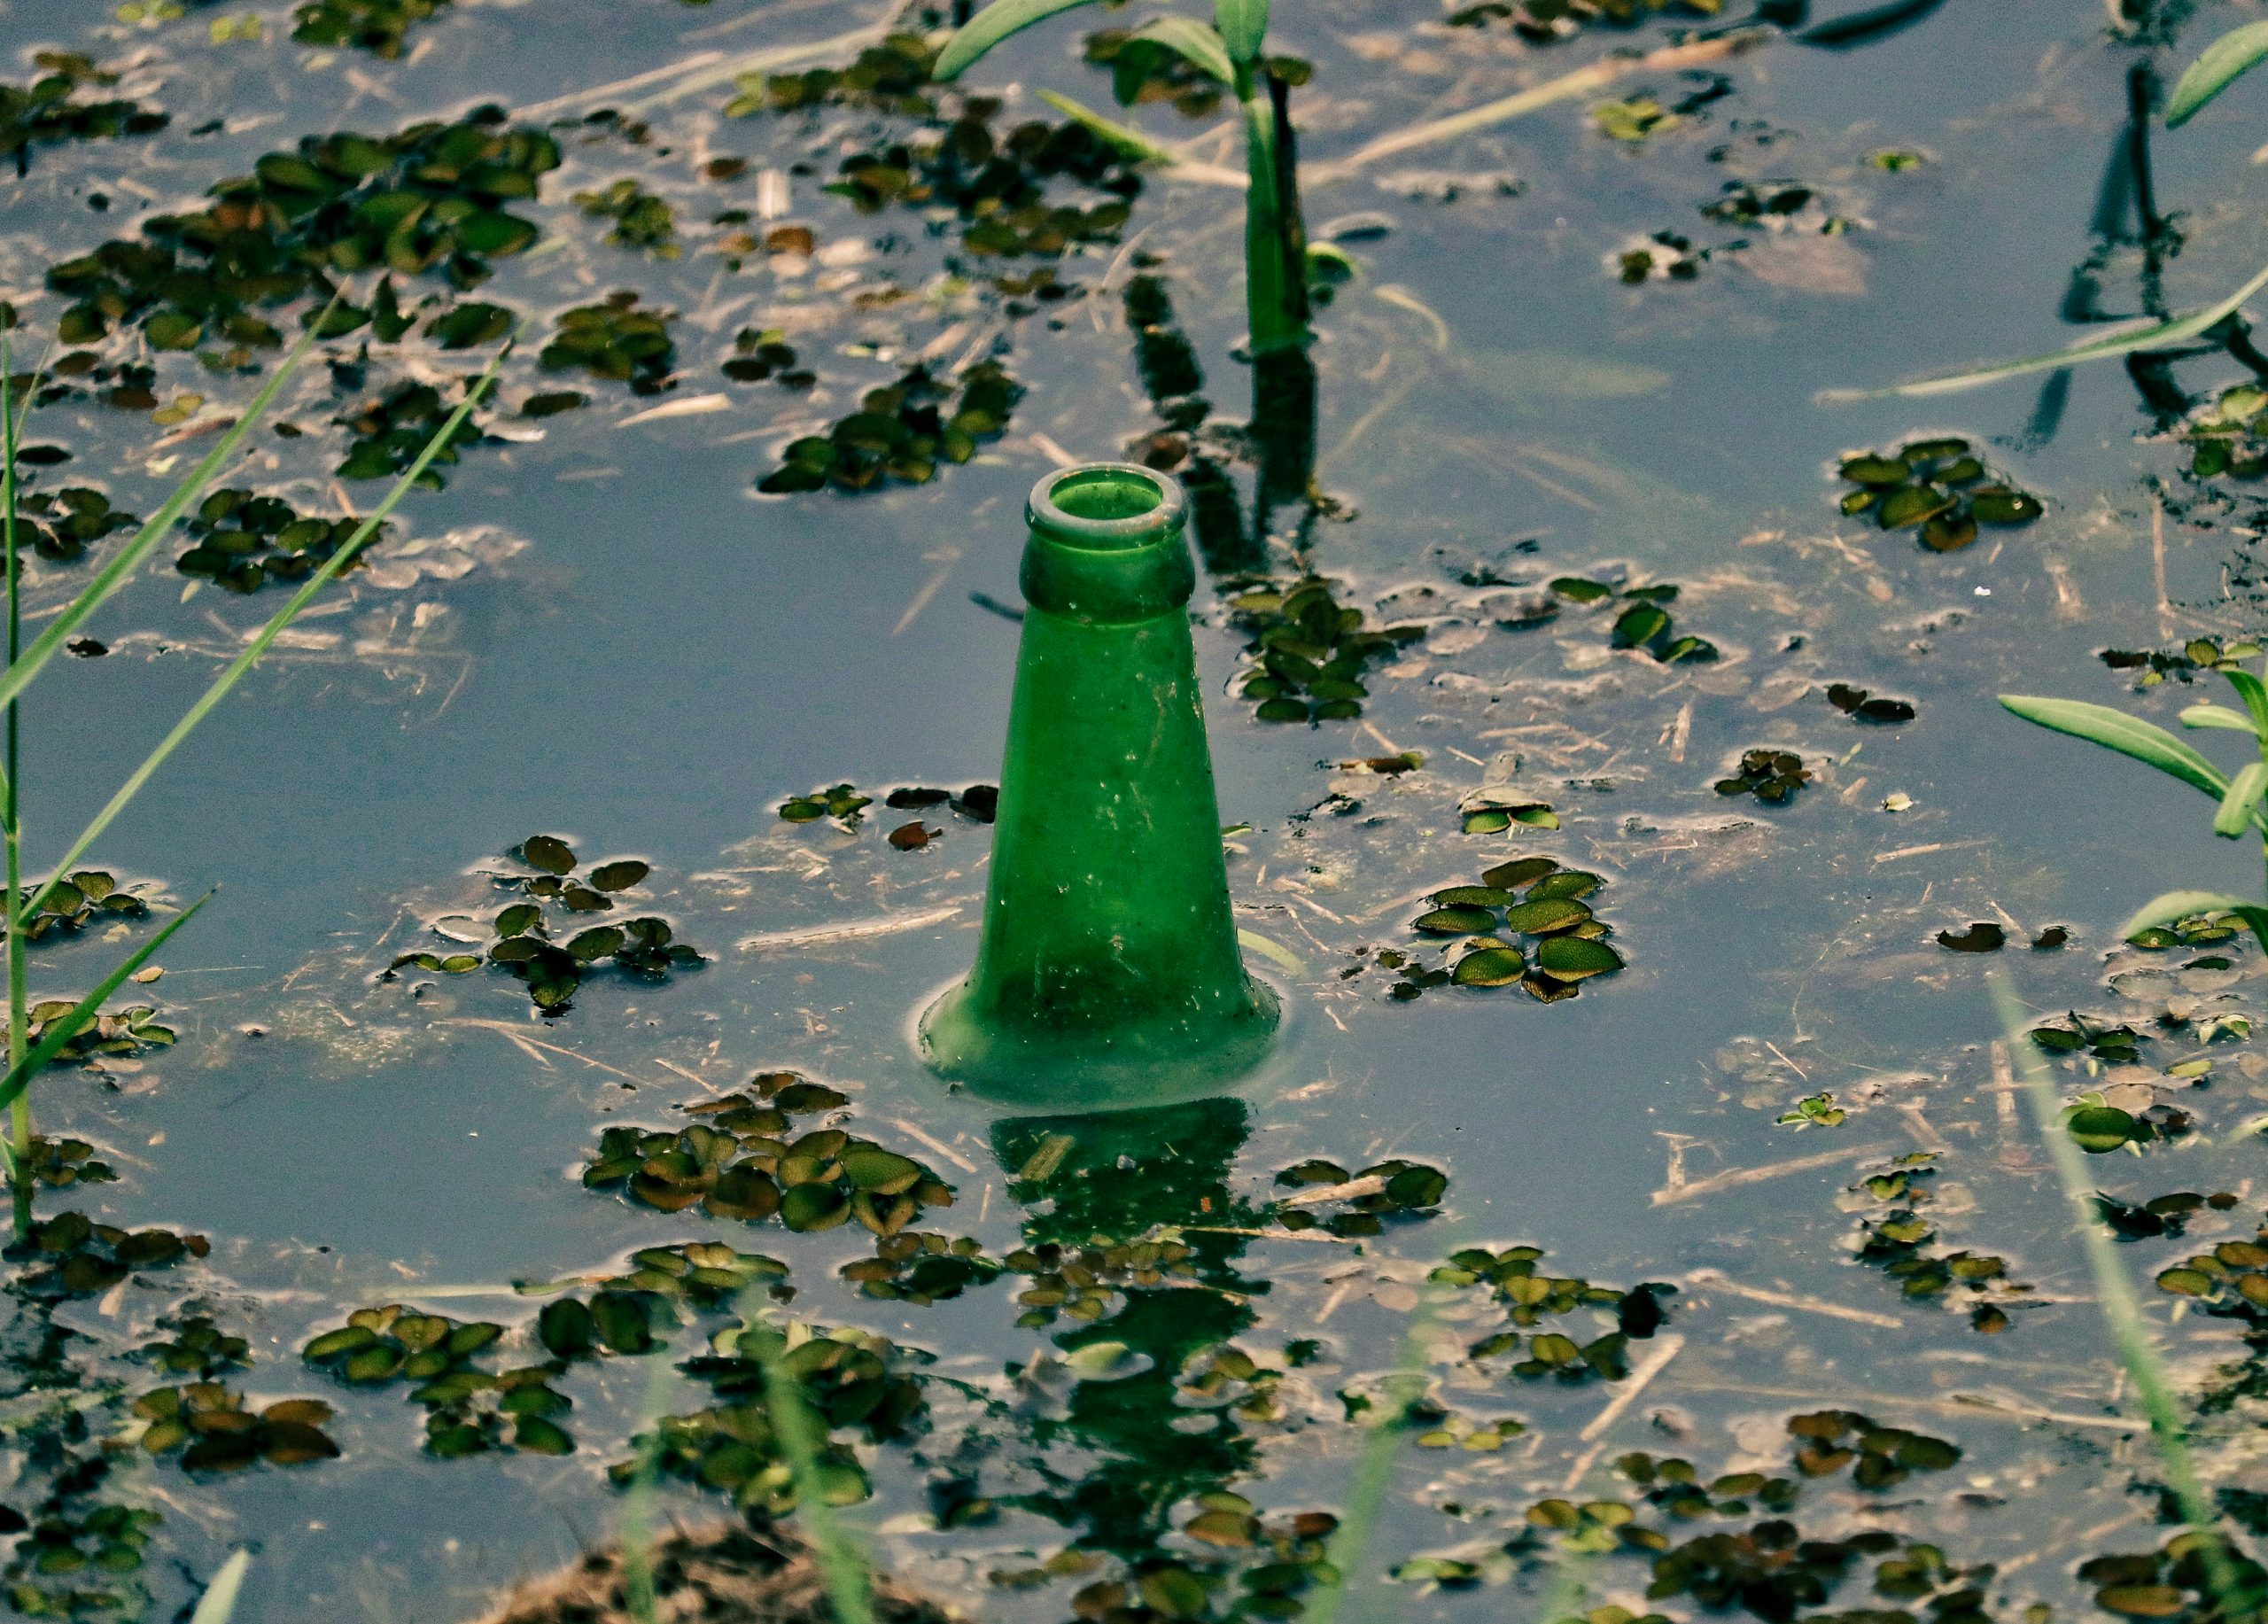 A glass bottle in a pond